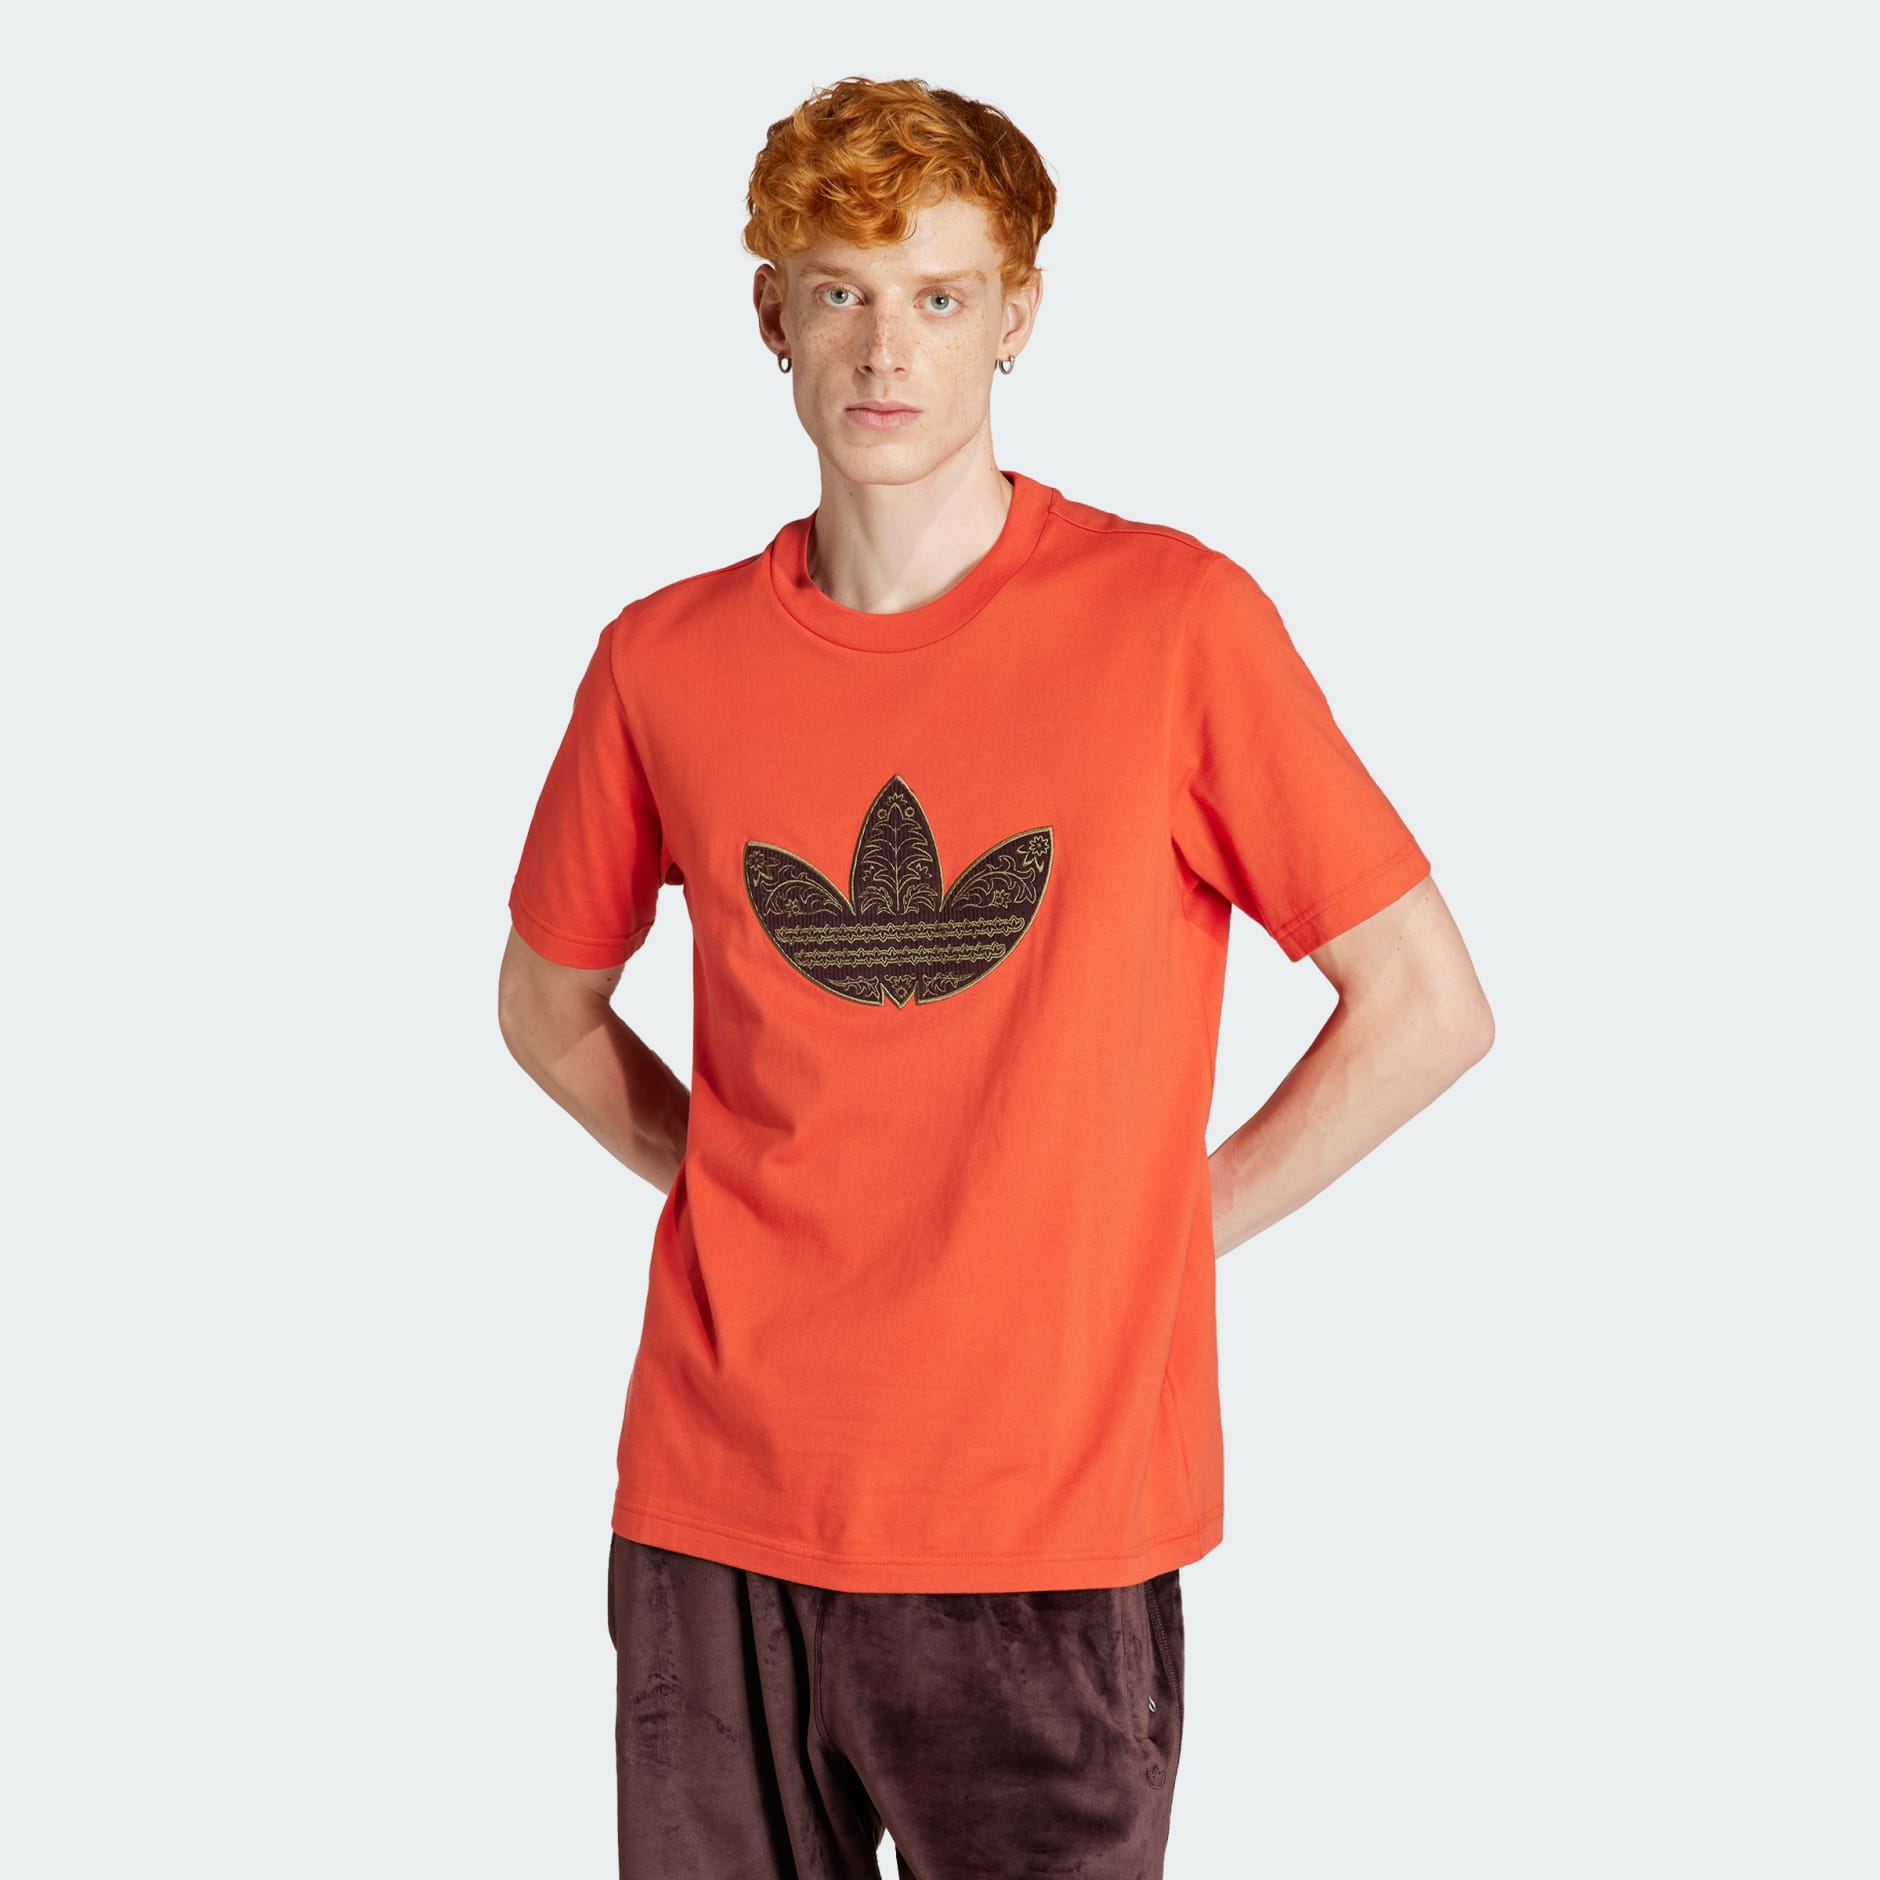 Clothing - Corduroy Appliqué Tee - Red | adidas South Africa